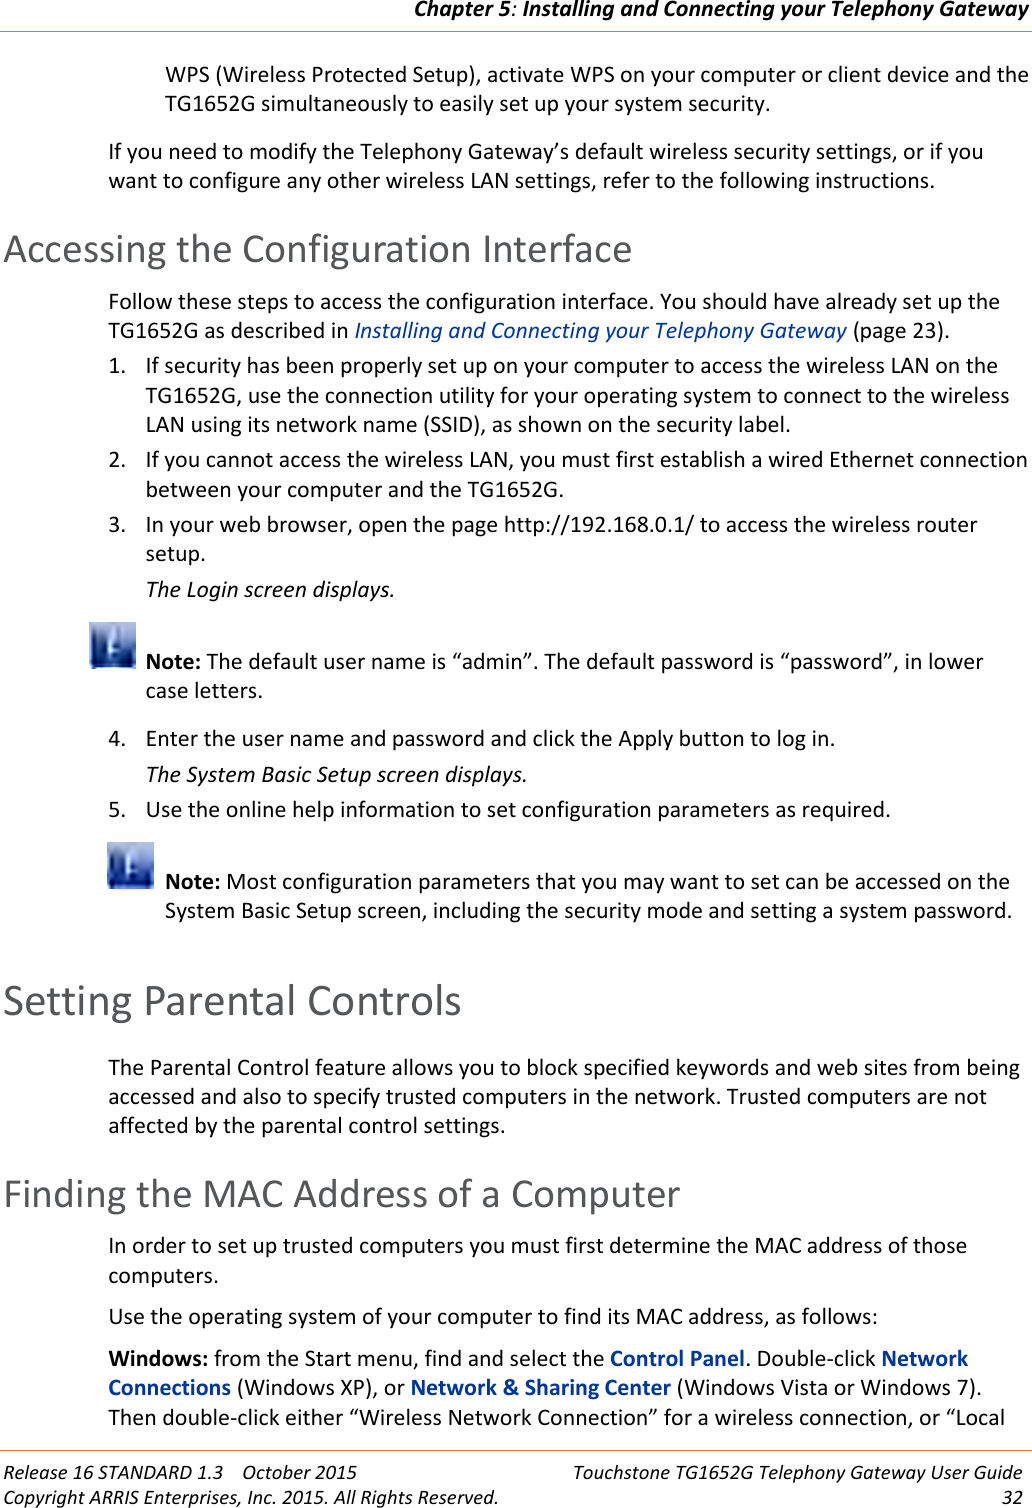 Chapter 5:Installing and Connecting your Telephony GatewayRelease 16 STANDARD 1.3 October 2015 Touchstone TG1652G Telephony Gateway User GuideCopyright ARRIS Enterprises, Inc. 2015. All Rights Reserved. 32WPS (Wireless Protected Setup), activate WPS on your computer or client device and theTG1652G simultaneously to easily set up your system security.If you need to modify the Telephony Gateway’s default wireless security settings, or if youwant to configure any other wireless LAN settings, refer to the following instructions.Accessing the Configuration InterfaceFollow these steps to access the configuration interface. You should have already set up theTG1652G as described in Installing and Connecting your Telephony Gateway (page 23).1. If security has been properly set up on your computer to access the wireless LAN on theTG1652G, use the connection utility for your operating system to connect to the wirelessLAN using its network name (SSID), as shown on the security label.2. If you cannot access the wireless LAN, you must first establish a wired Ethernet connectionbetween your computer and the TG1652G.3. In your web browser, open the page http://192.168.0.1/ to access the wireless routersetup.The Login screen displays.Note: The default user name is “admin”. The default password is “password”, in lowercase letters.4. Enter the user name and password and click the Apply button to log in.The System Basic Setup screen displays.5. Use the online help information to set configuration parameters as required.Note: Most configuration parameters that you may want to set can be accessed on theSystem Basic Setup screen, including the security mode and setting a system password.Setting Parental ControlsThe Parental Control feature allows you to block specified keywords and web sites from beingaccessed and also to specify trusted computers in the network. Trusted computers are notaffected by the parental control settings.Finding the MAC Address of a ComputerIn order to set up trusted computers you must first determine the MAC address of thosecomputers.Use the operating system of your computer to find its MAC address, as follows:Windows: from the Start menu, find and select the Control Panel. Double-click NetworkConnections (Windows XP), or Network &amp; Sharing Center (Windows Vista or Windows 7).Then double-click either “Wireless Network Connection” for a wireless connection, or “Local